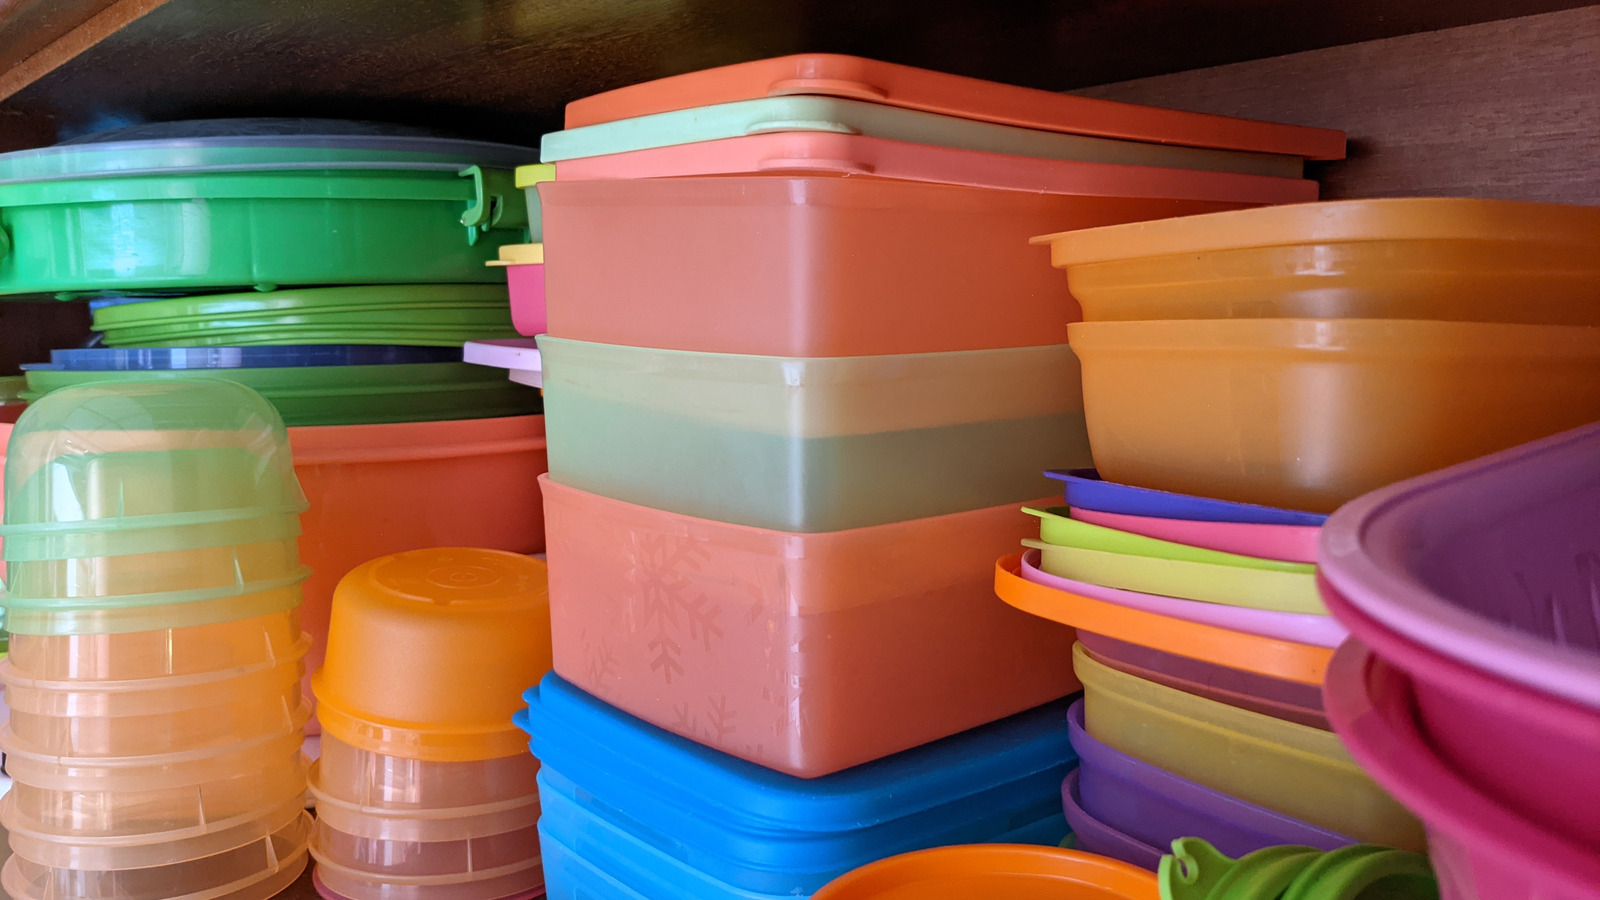 Tupperware and plastic container safety